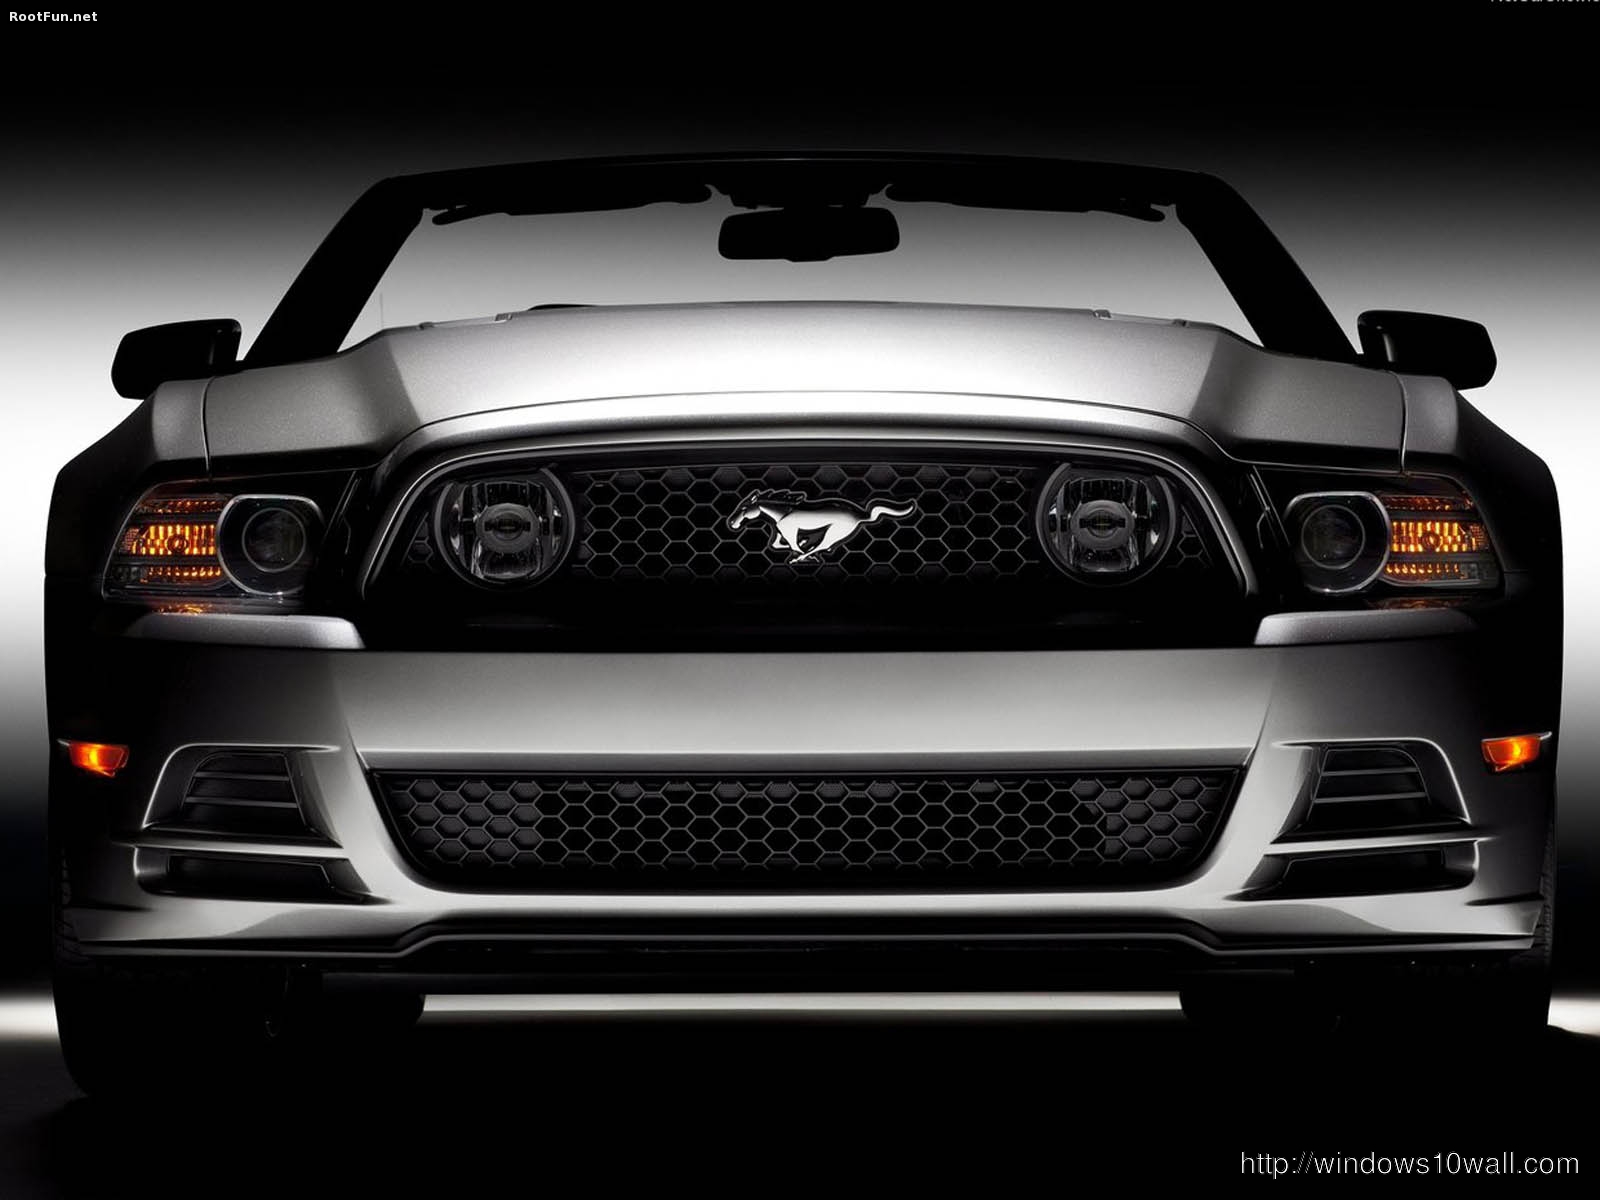 Ford Mustang GT 2013 front Background Wallpaper